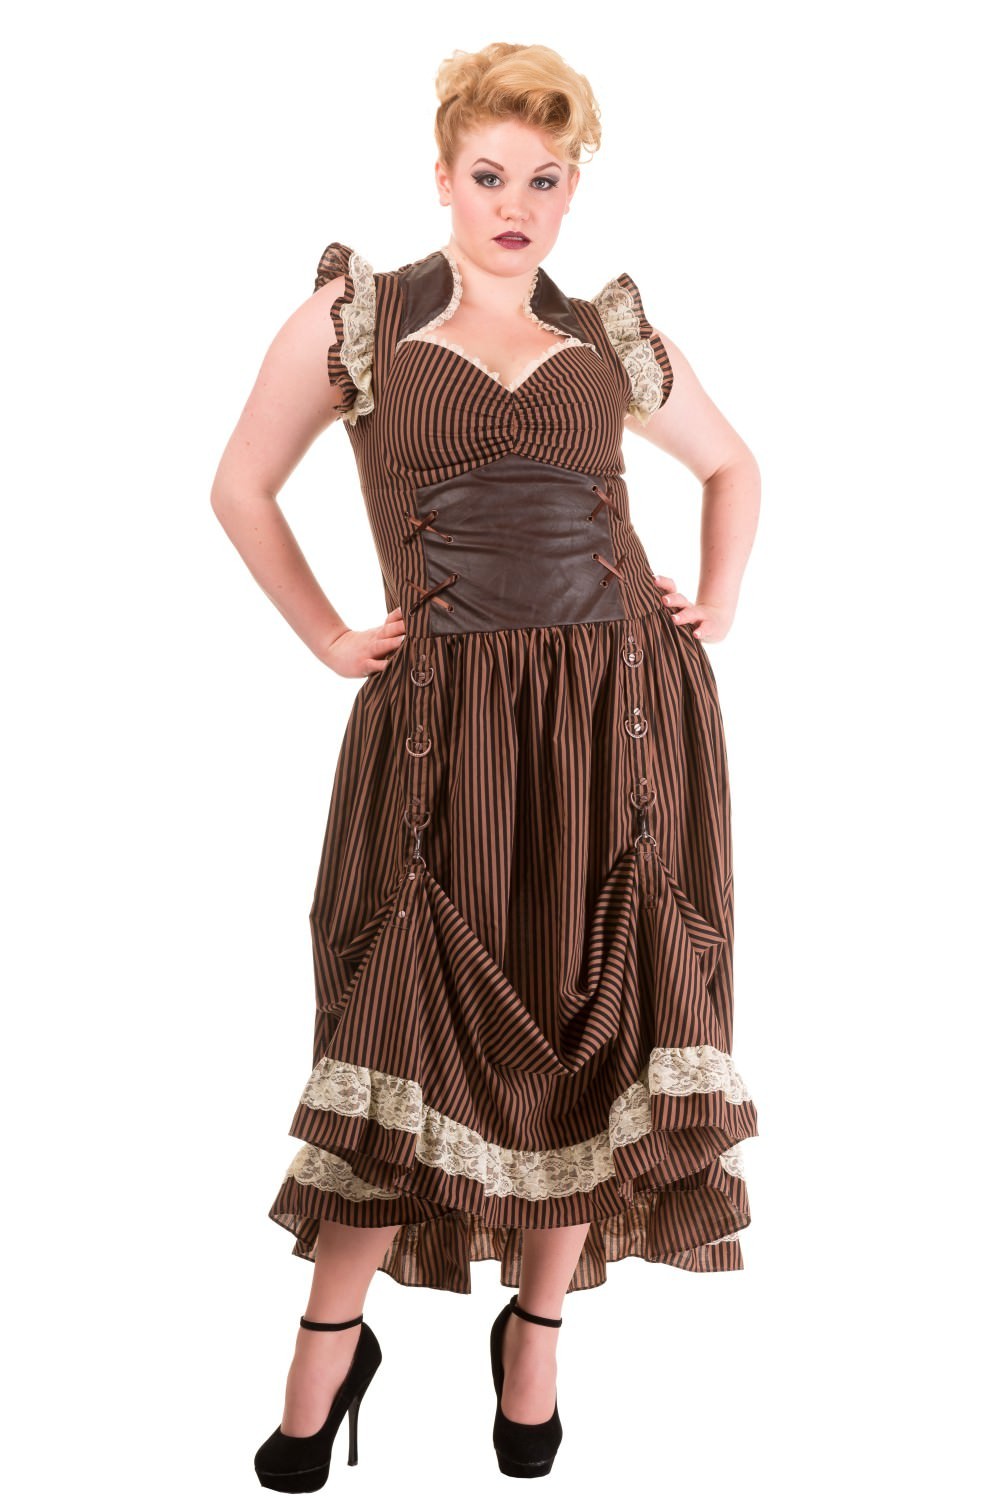 Victorian Steampunk Dress in Stripe - SOLD OUT